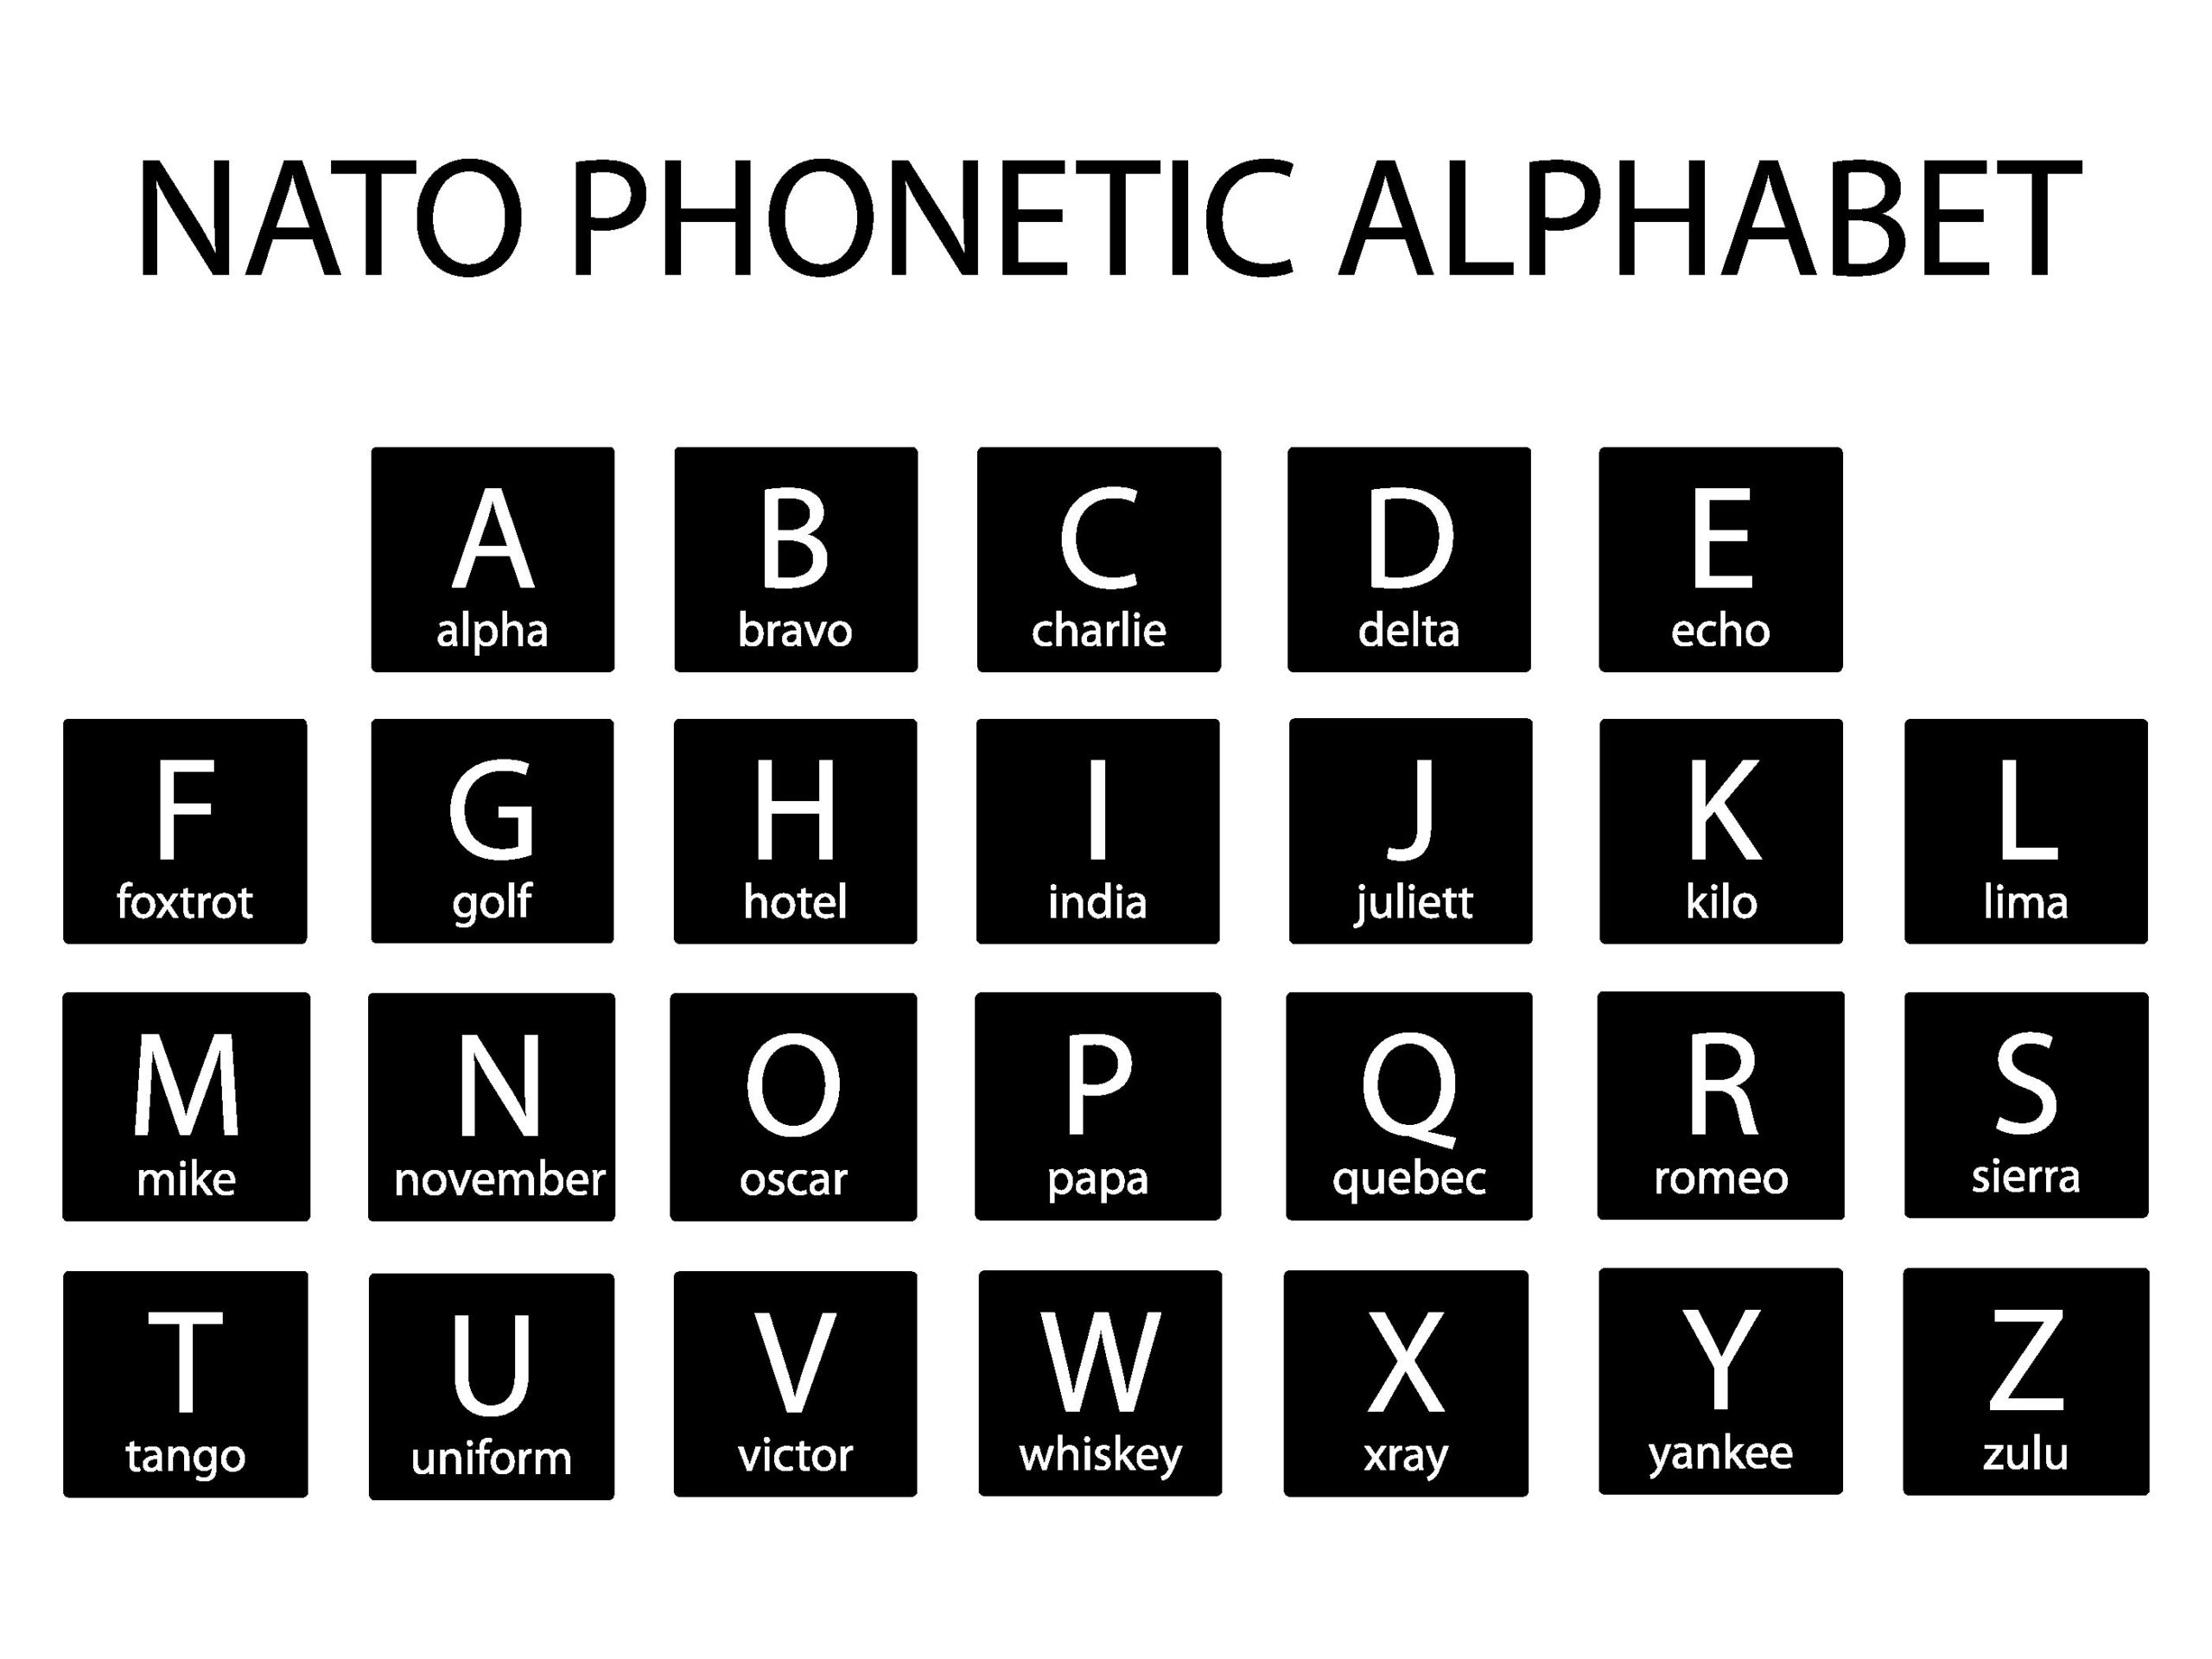 Phonetic Letters In The NATO Alphabet